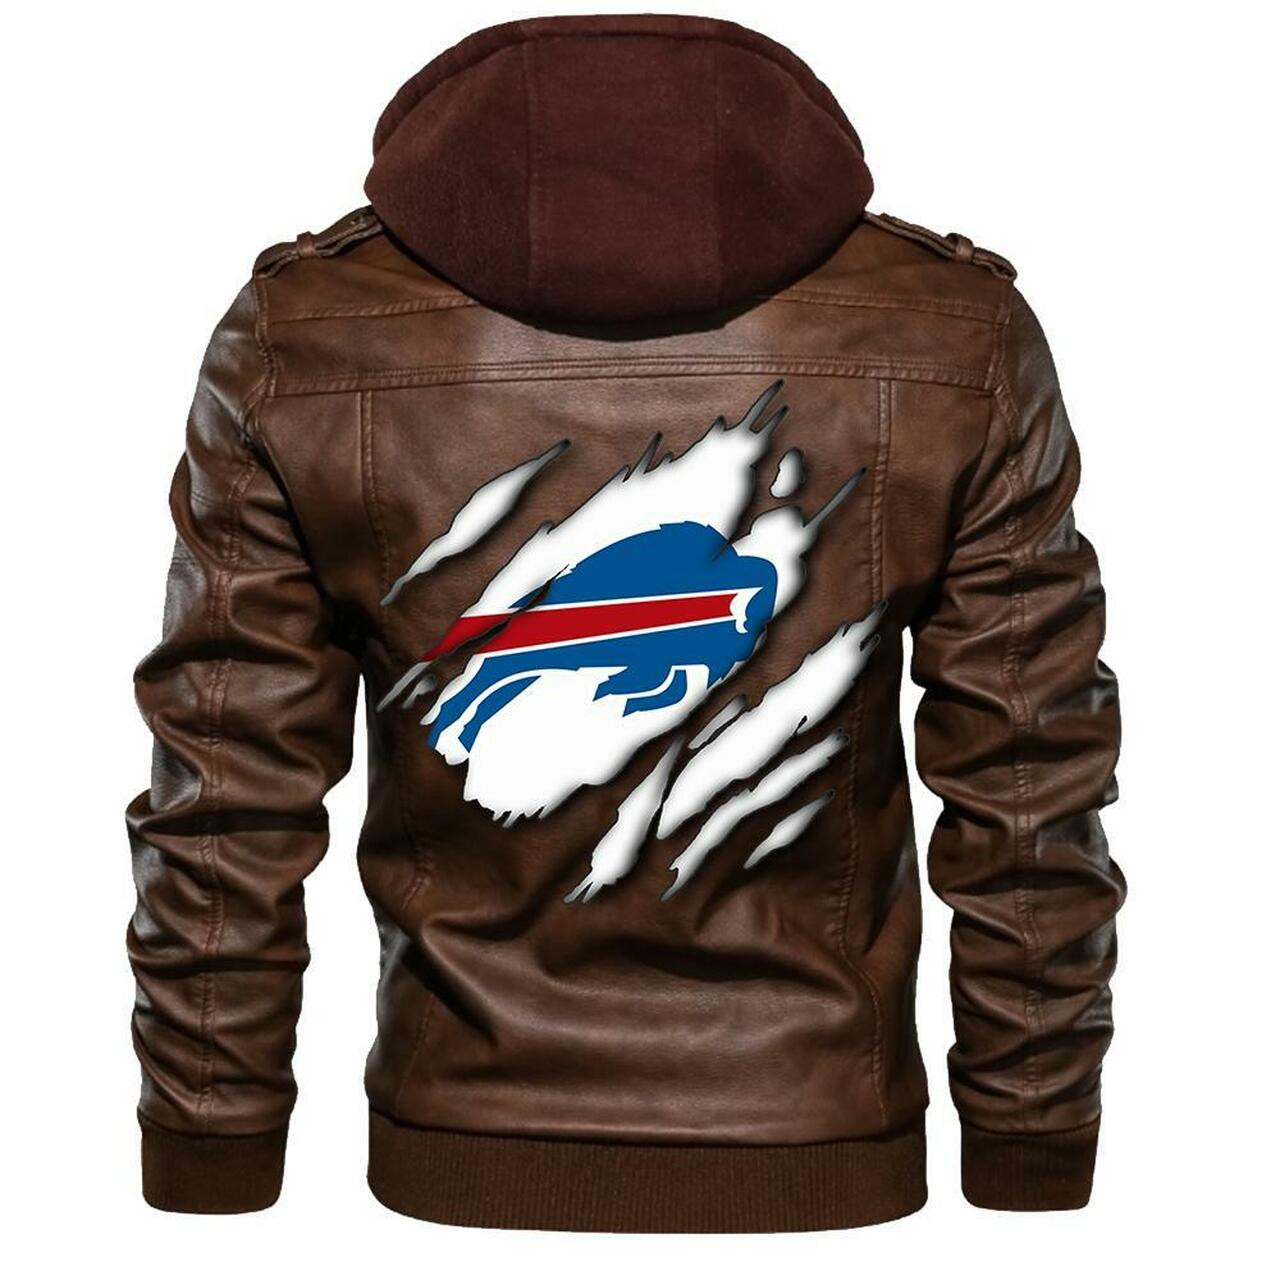 Check out our collection of the latest and greatest leather jacket 94